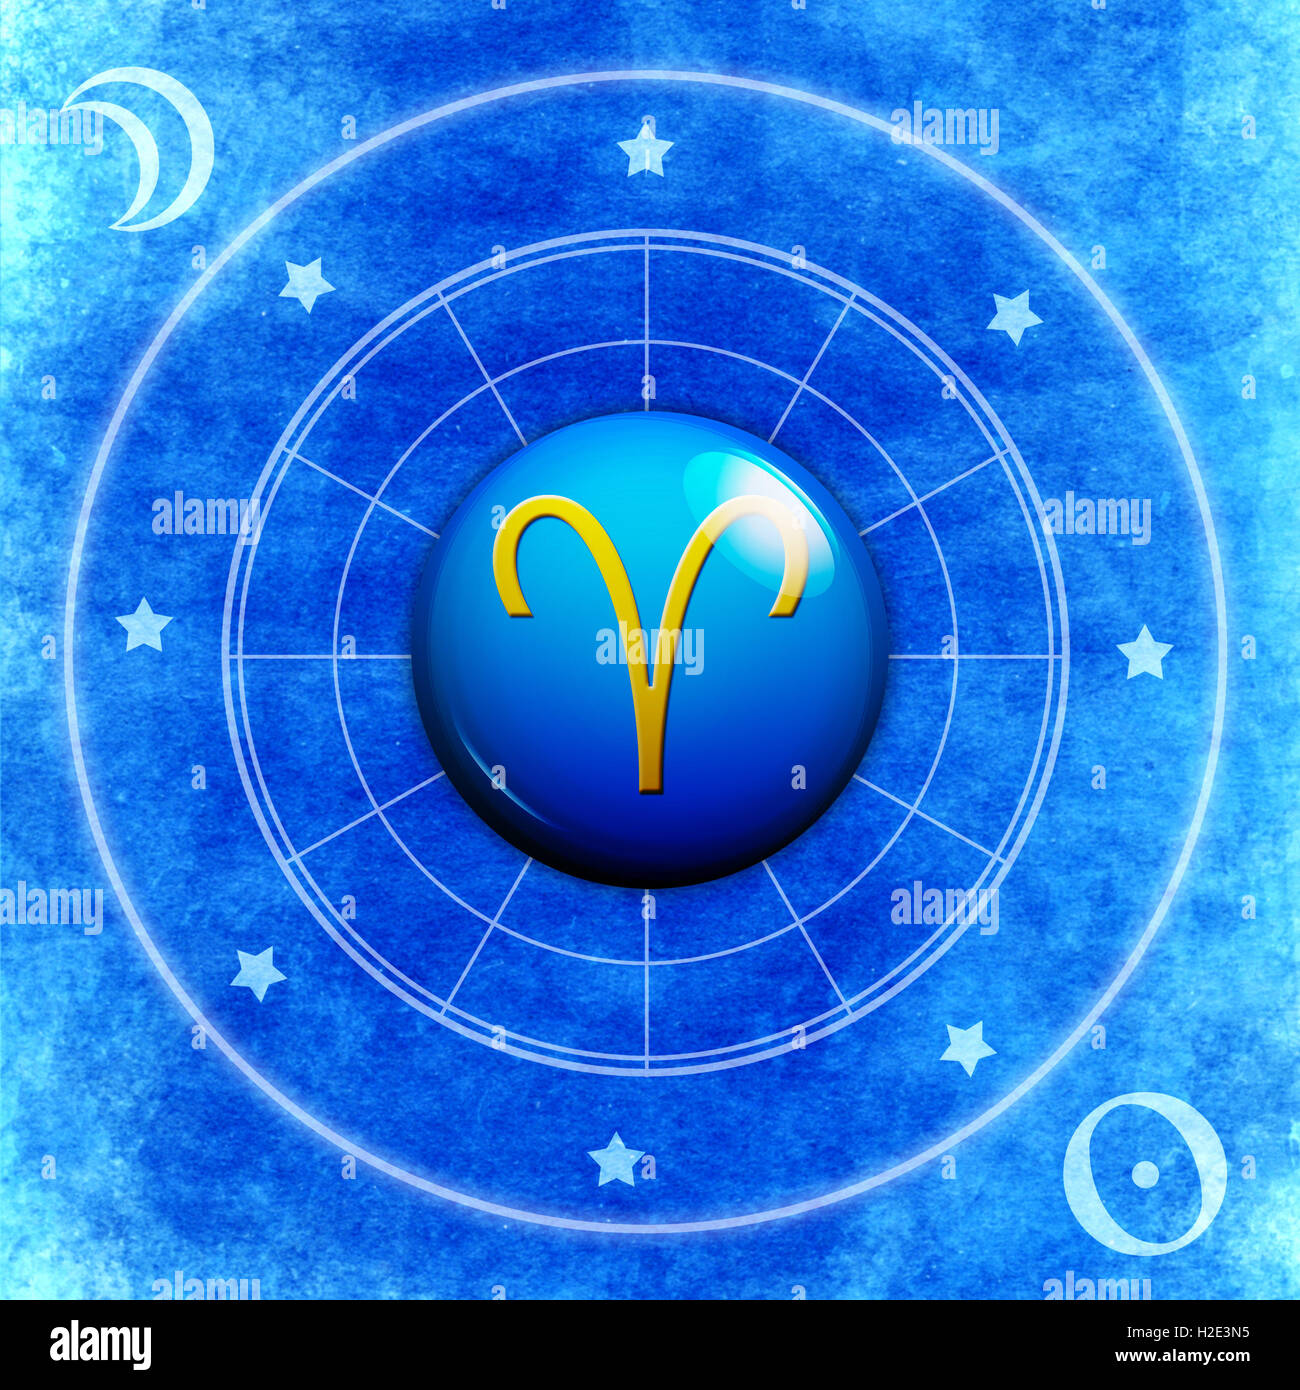 Aries astrology sign Stock Photo - Alamy